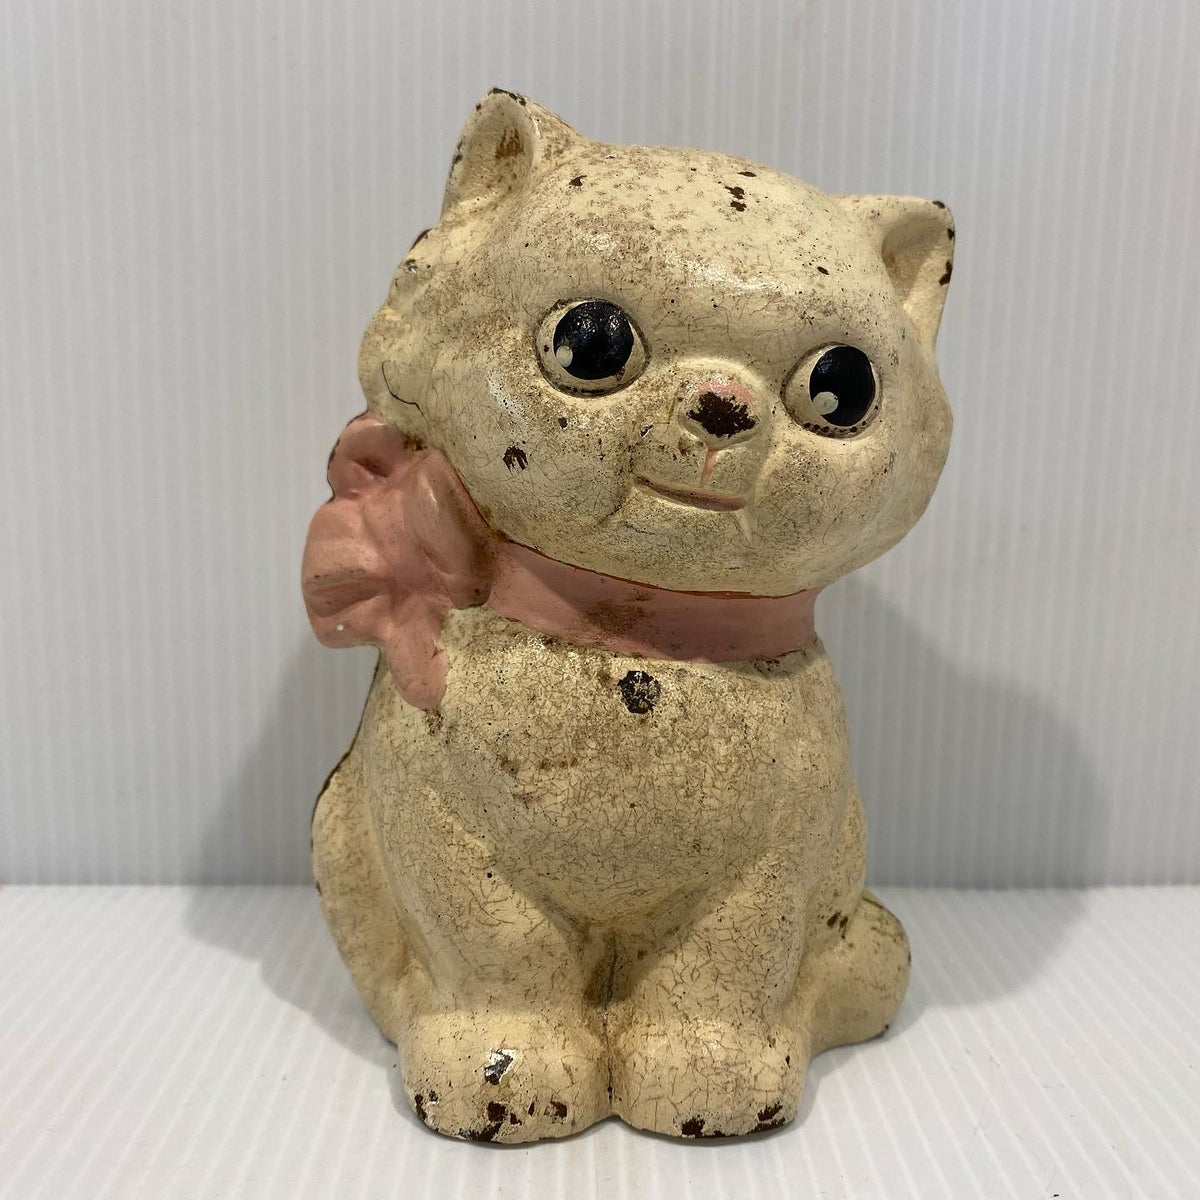 Antique, original, Cast Iron KITTY BANK made by Hubley. 1920s